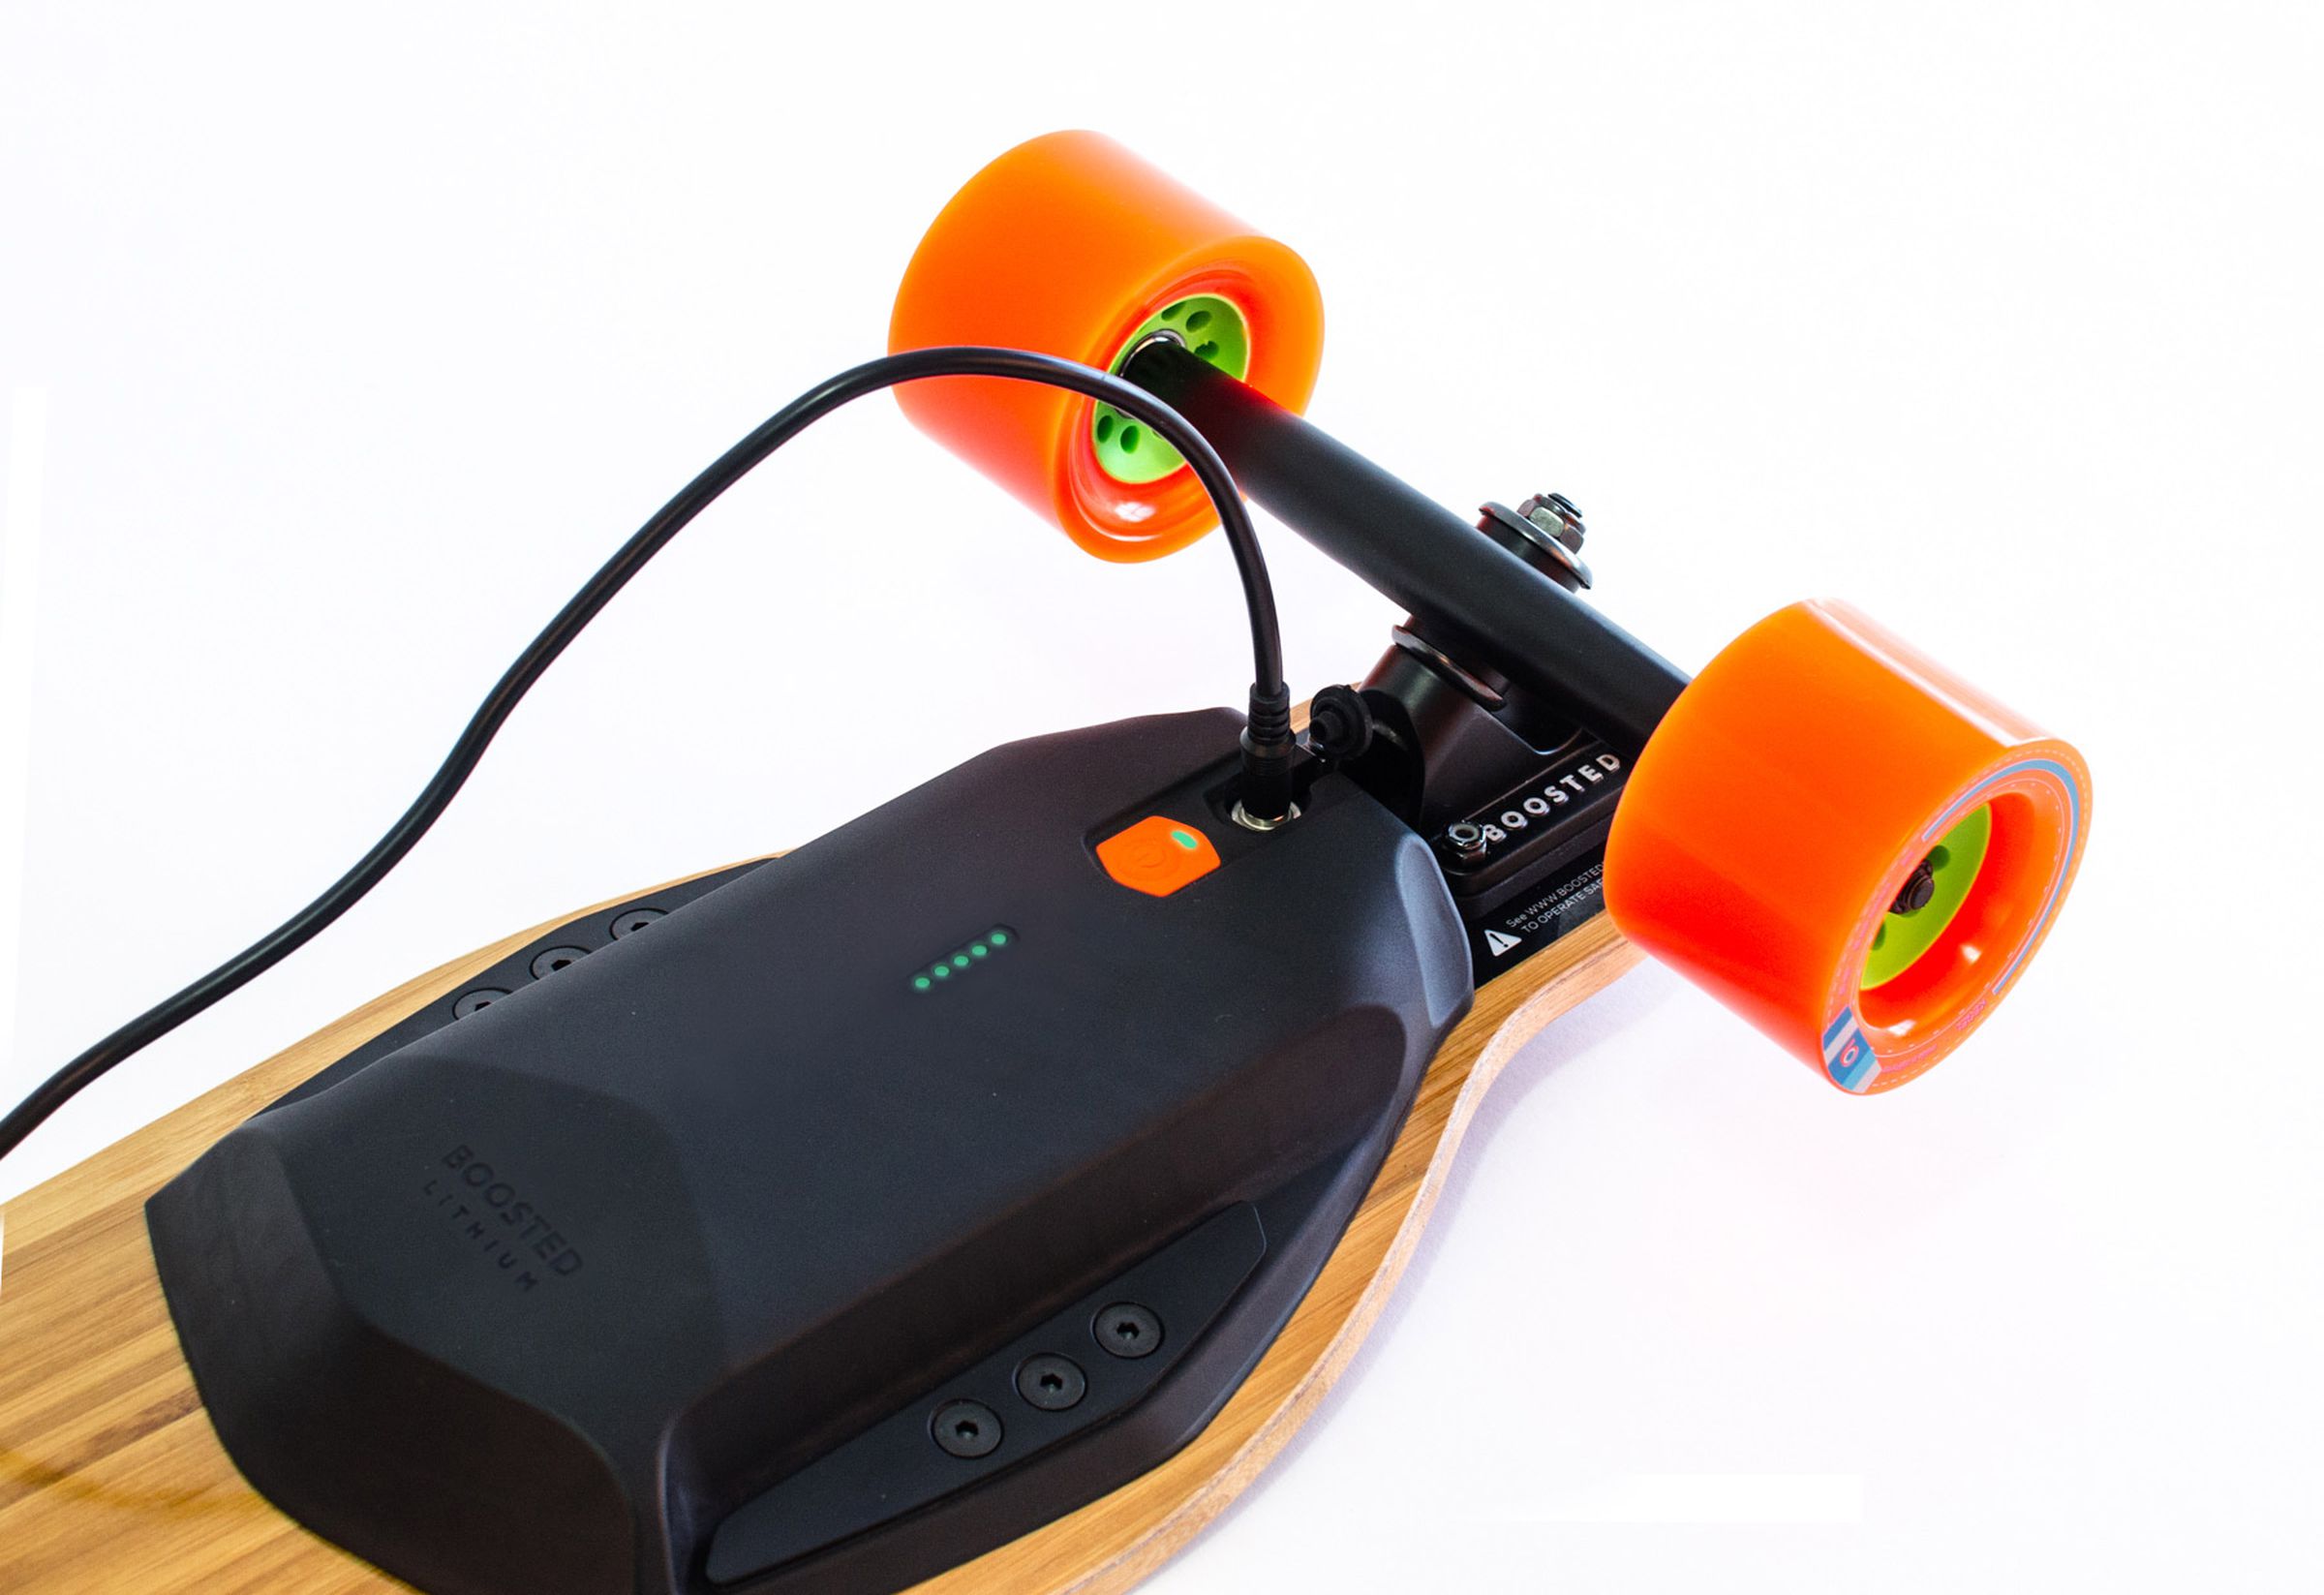 Boosted Board second generation photos